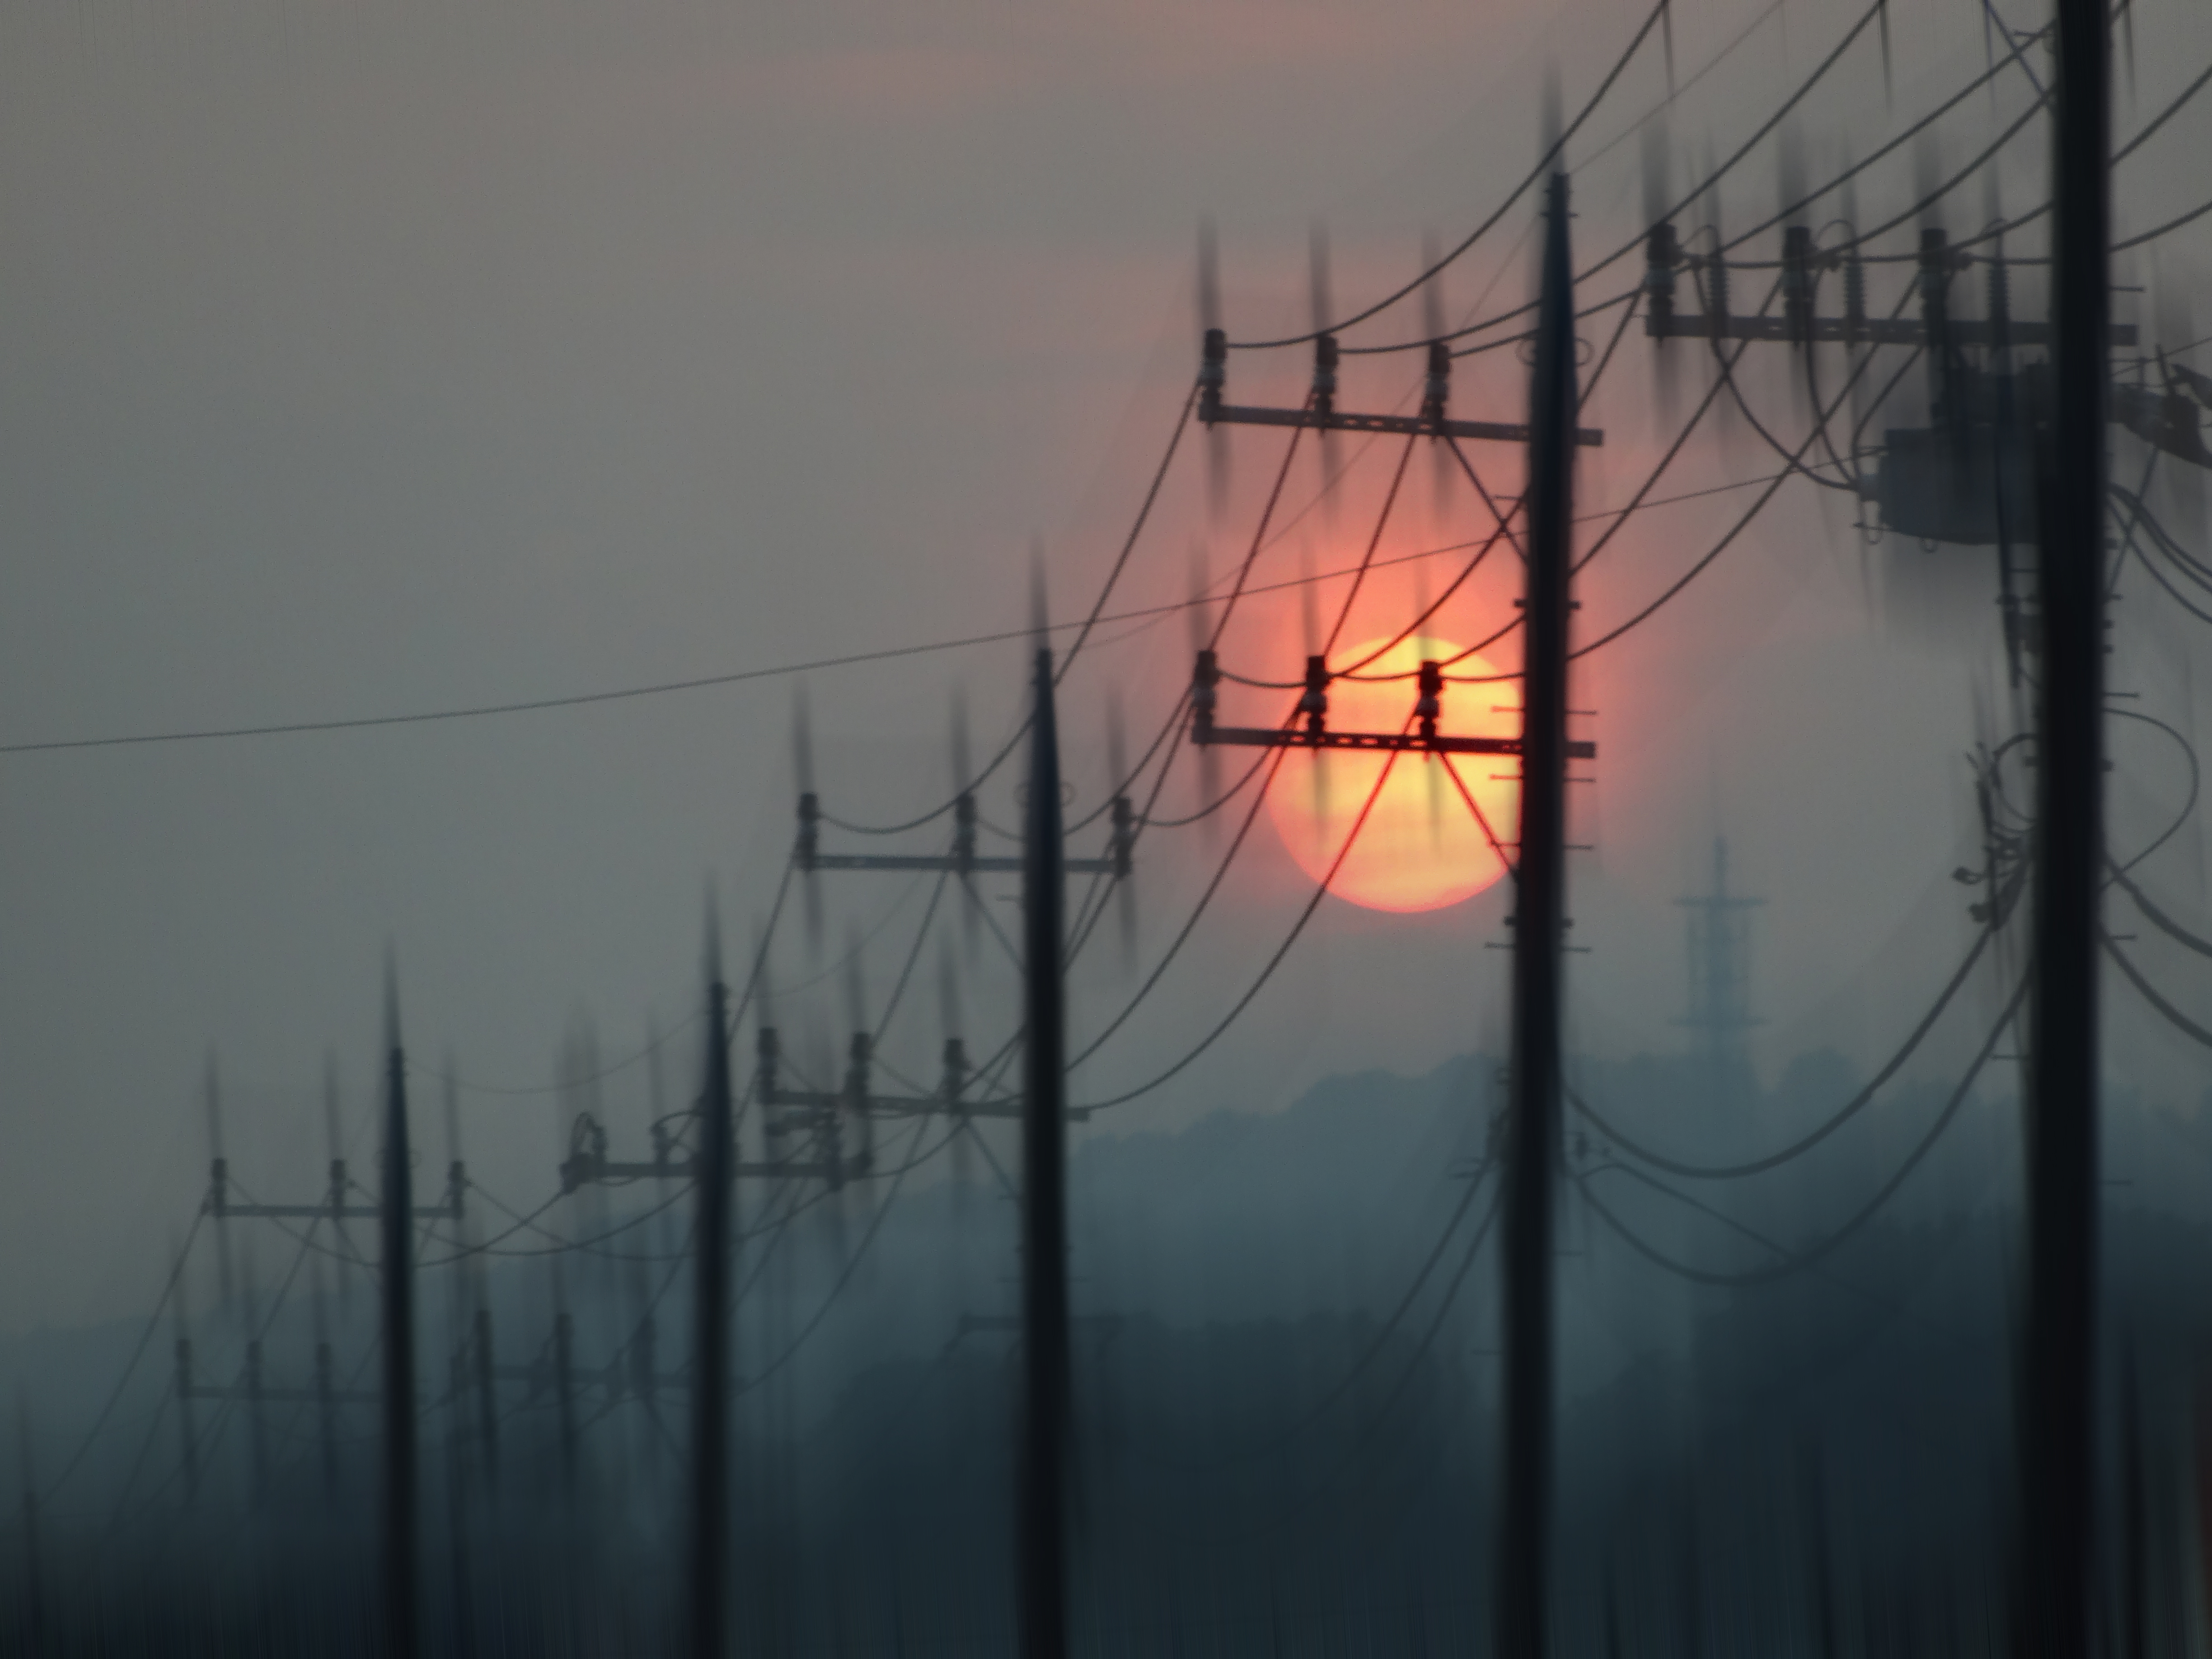 blur, wires, sunset, sun, miscellanea, miscellaneous, smooth, pillars, posts, wire